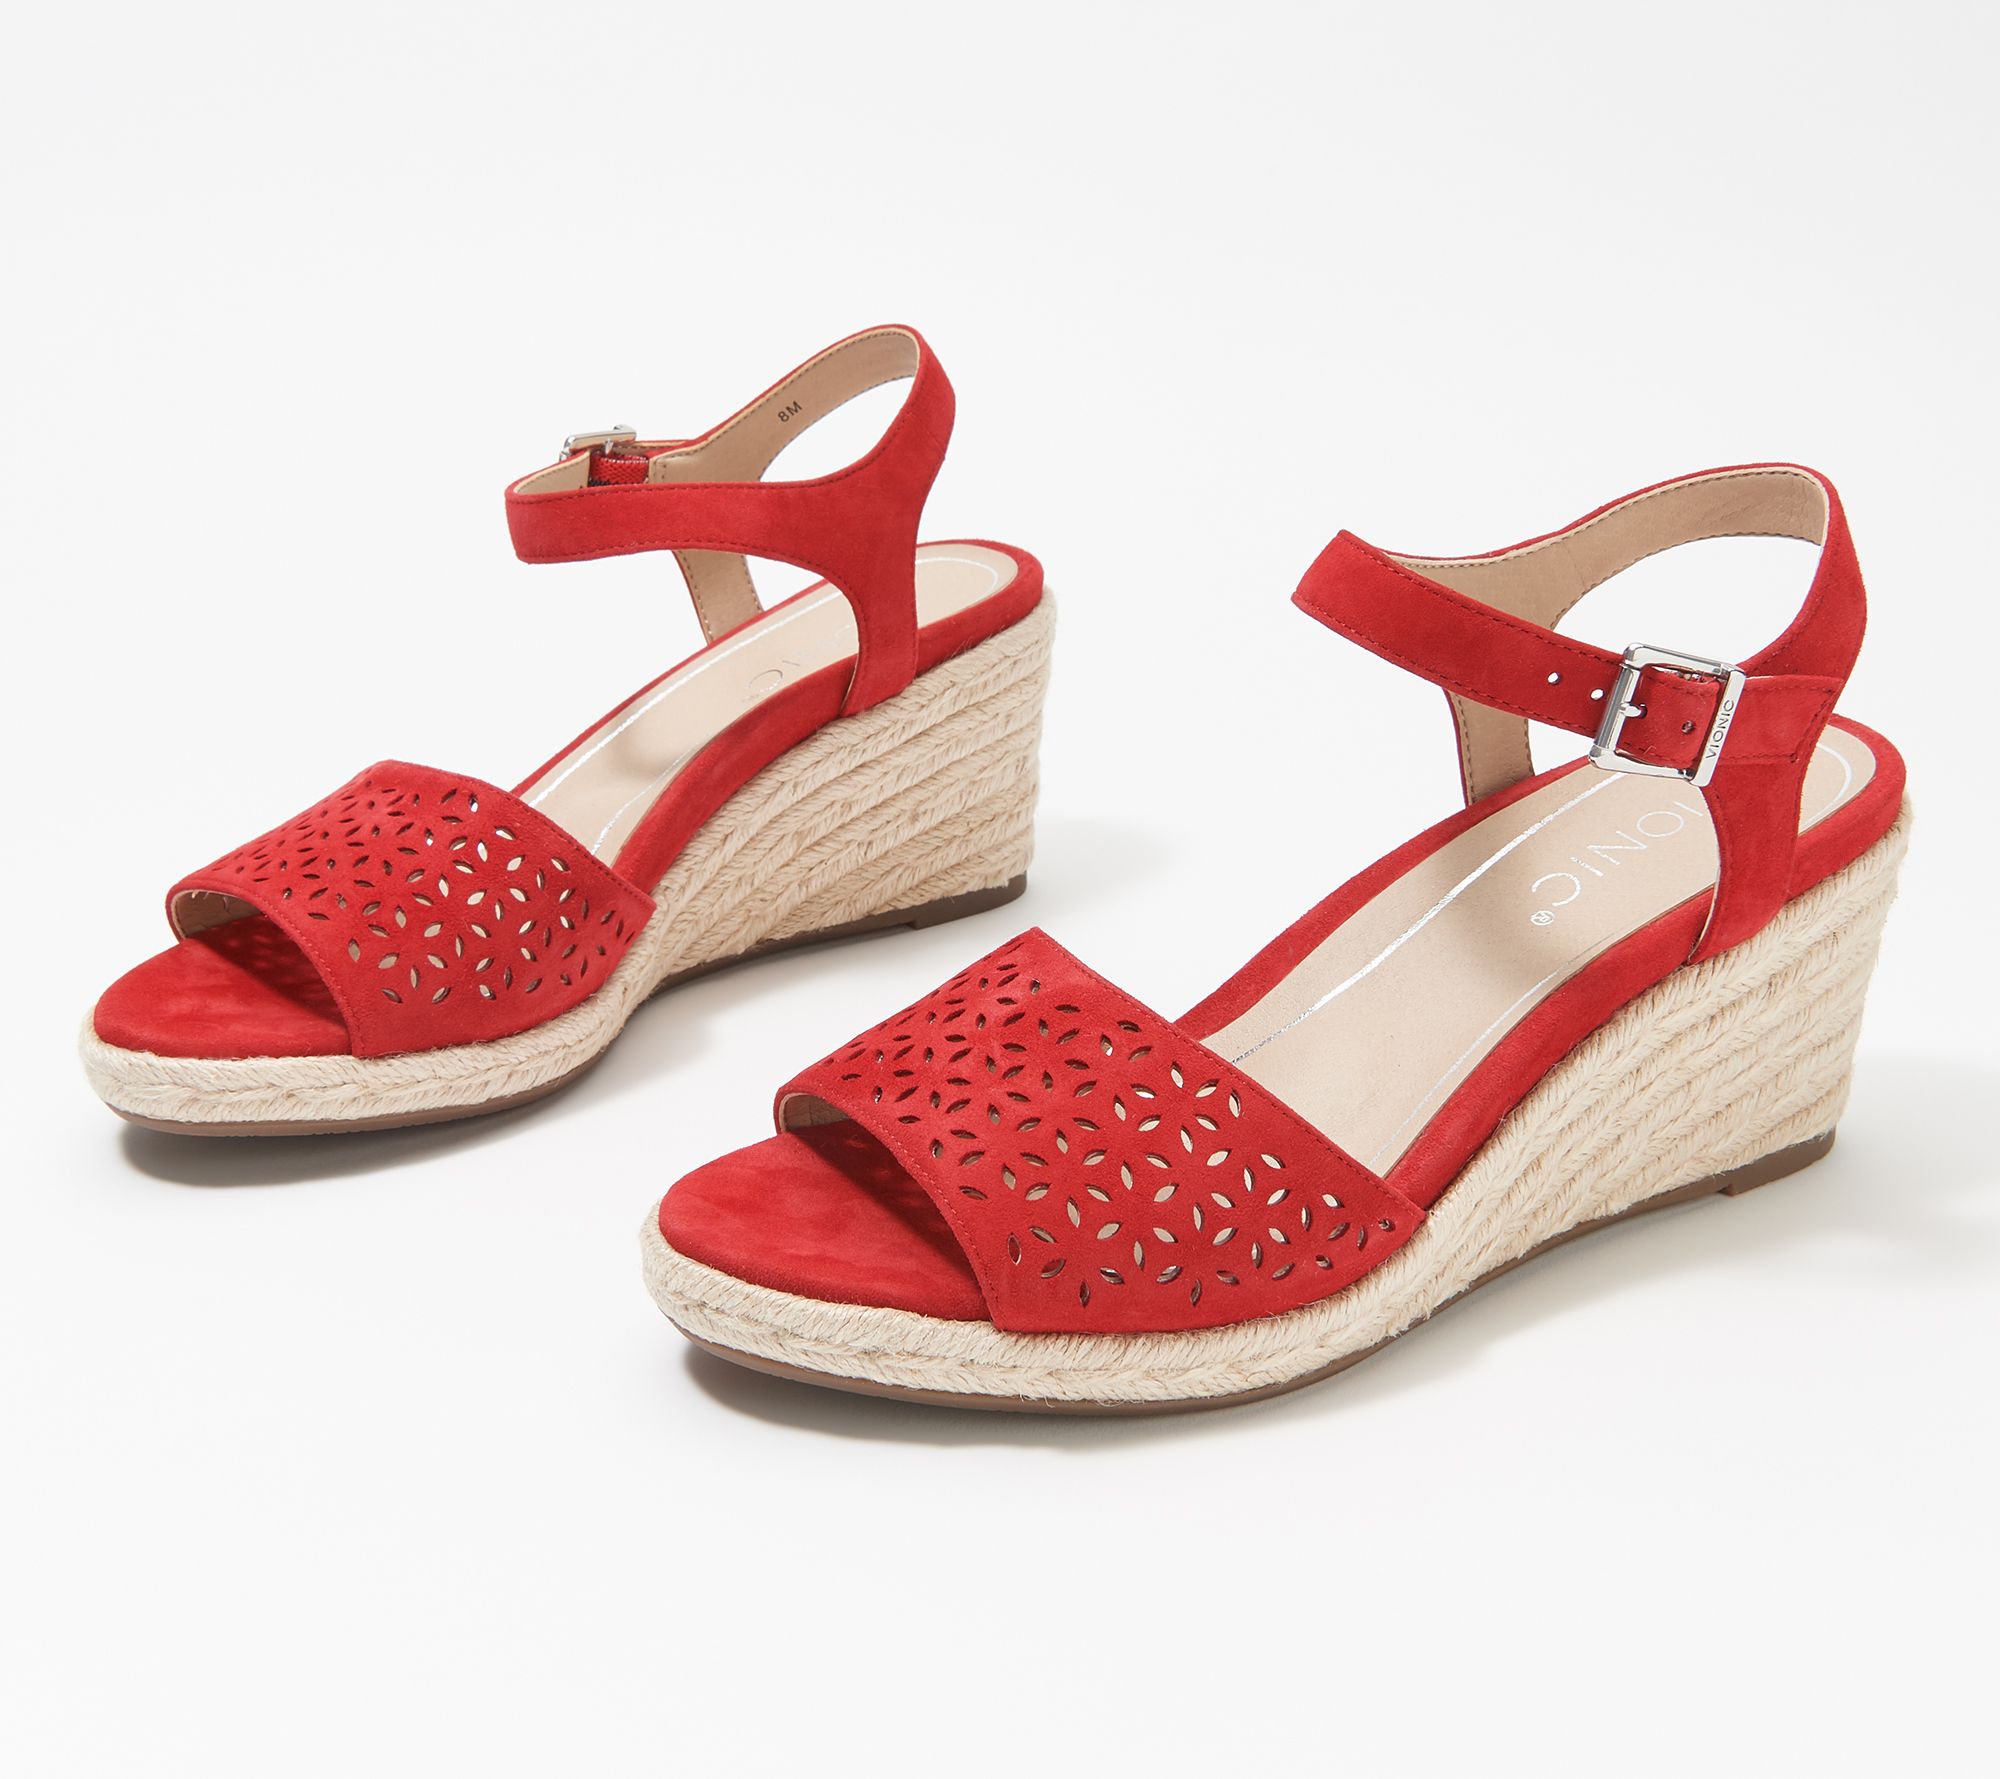 Vionic Leather Perforated Espadrille Wedges Ariel - QVC.com